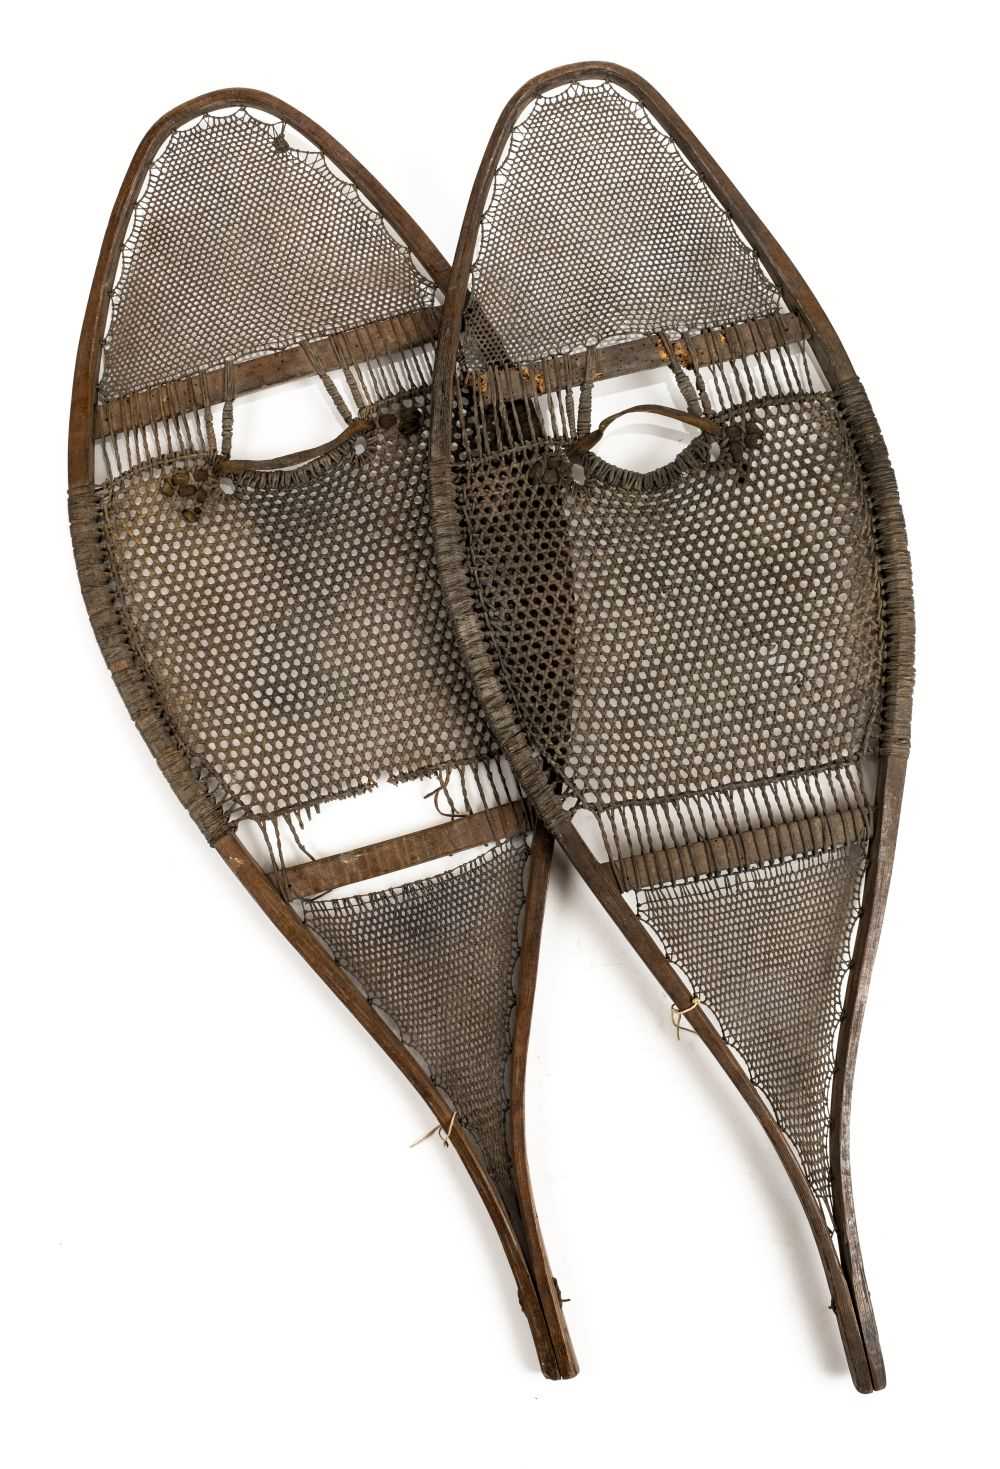 Lot 113 - North American Indian. A pair of early 20th-century snow shoes